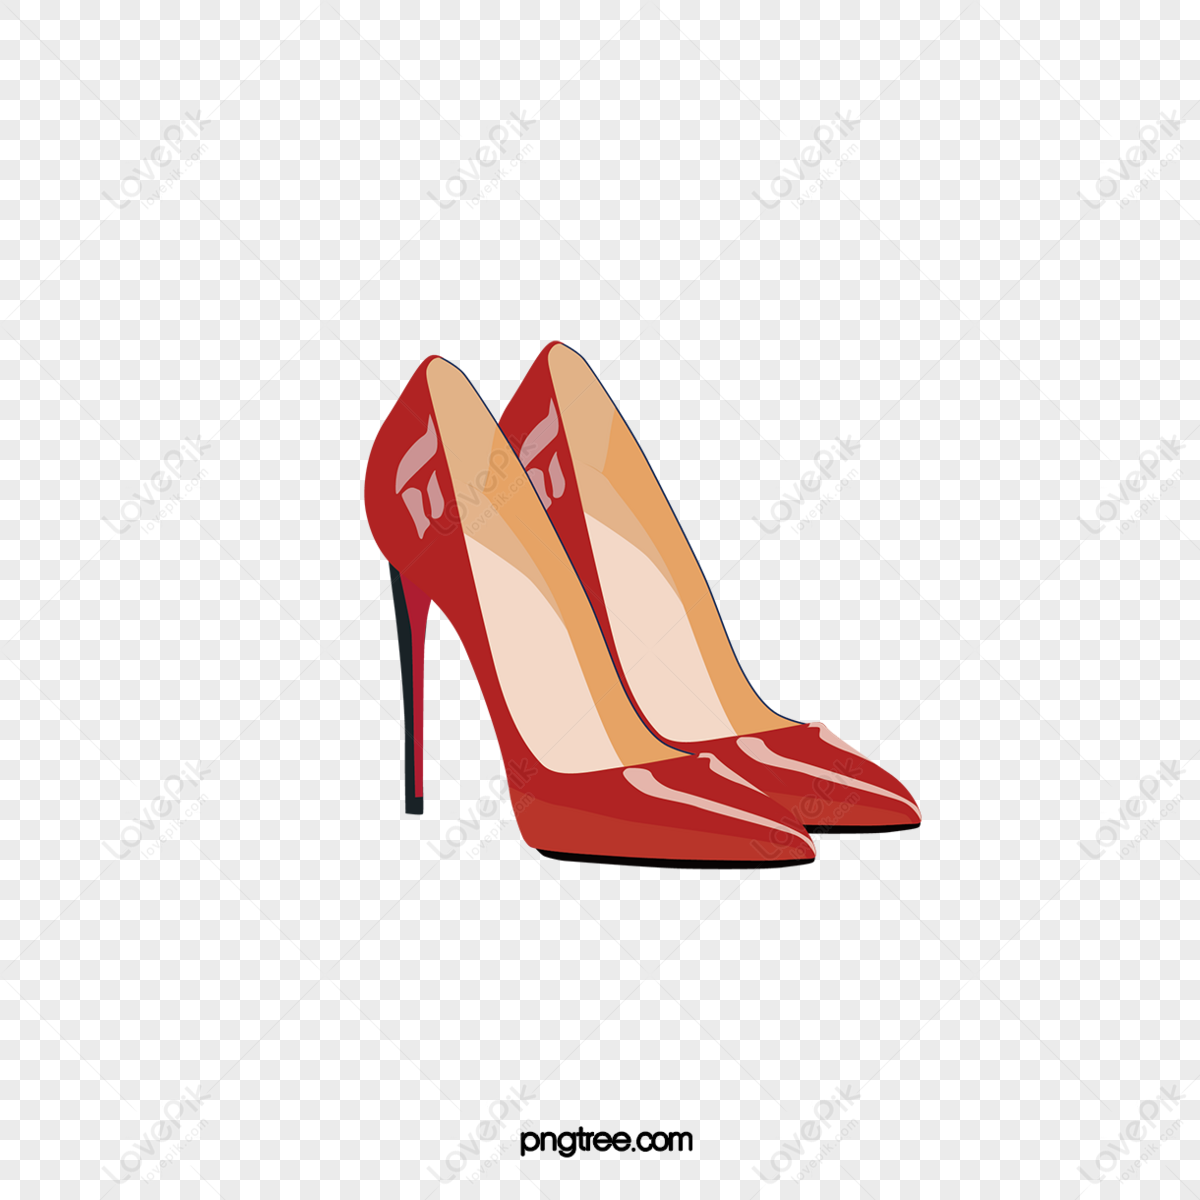 High Heel Shoes Vector, Sticker Clipart Red Dot Shoe With A Bow Cartoon,  Sticker, Clipart PNG and Vector with Transparent Background for Free  Download